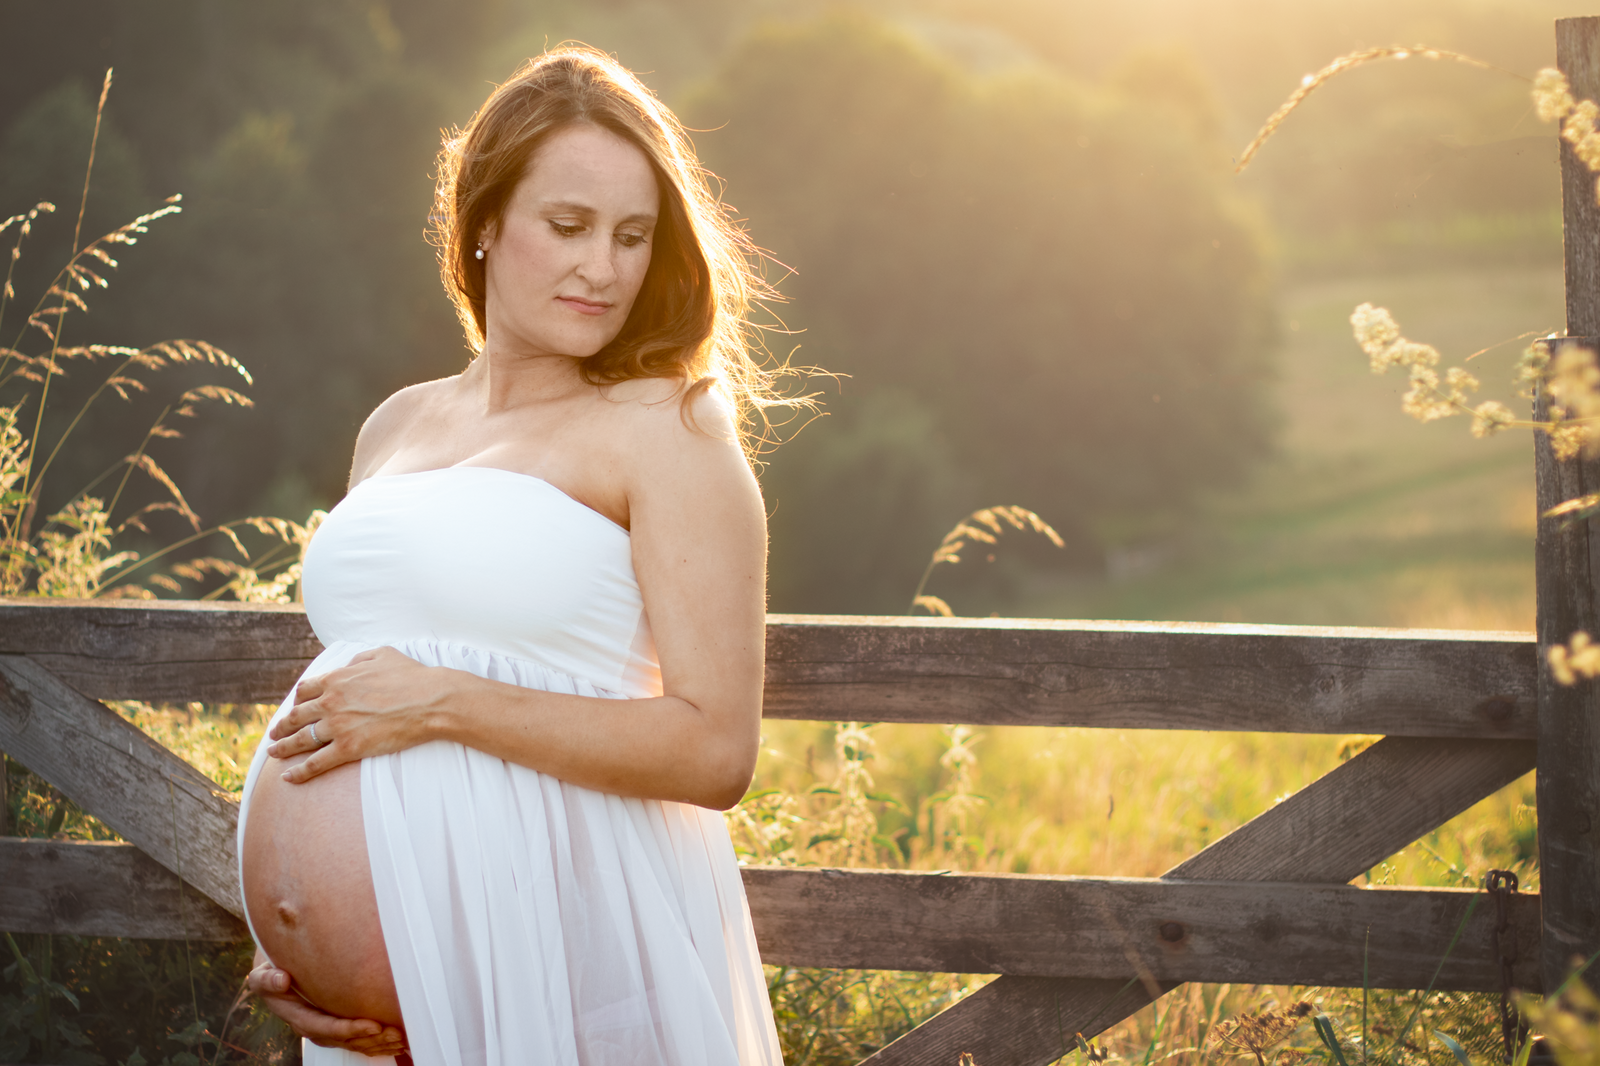 Pregnant lady stand in golden hour light for maternity photos